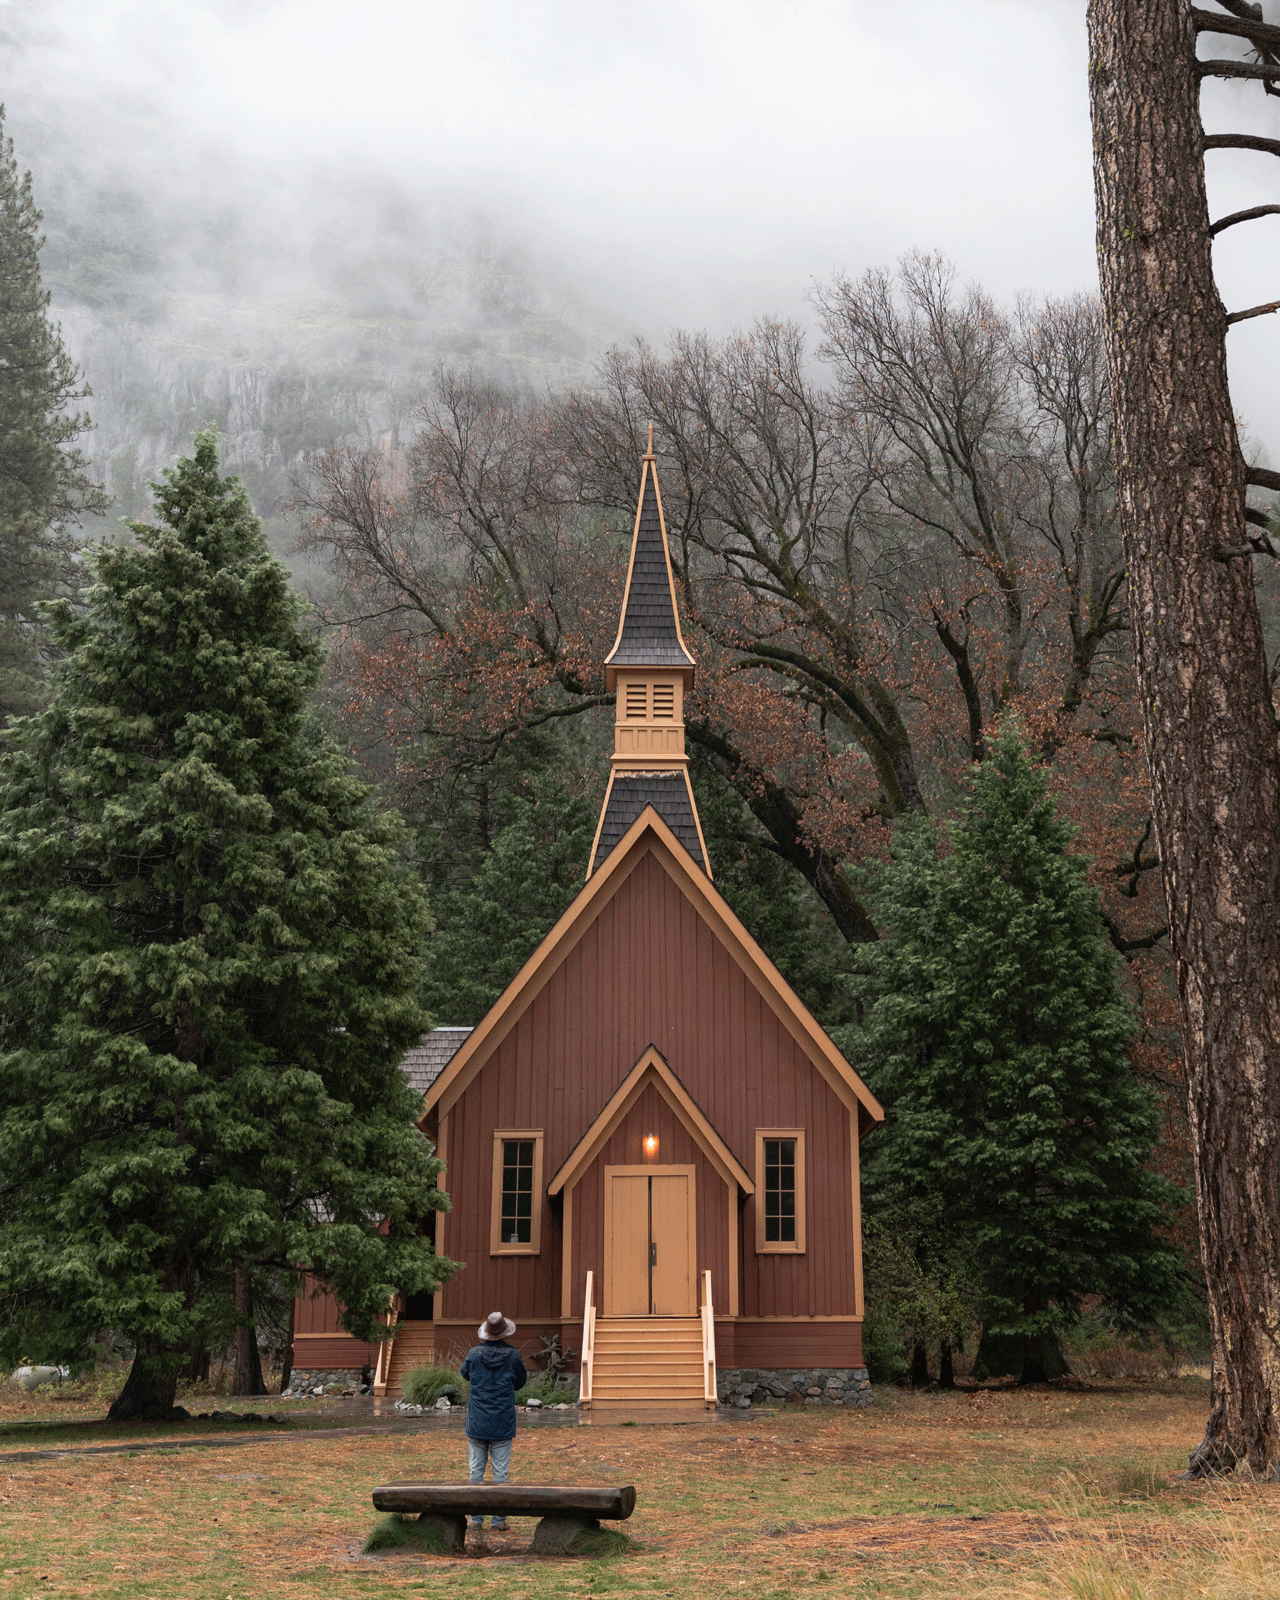 A person stands facing a small, rustic wooden church with a tall steeple, surrounded by trees in a forest. The scene is misty, with low clouds in the background, creating a serene and peaceful atmosphere.